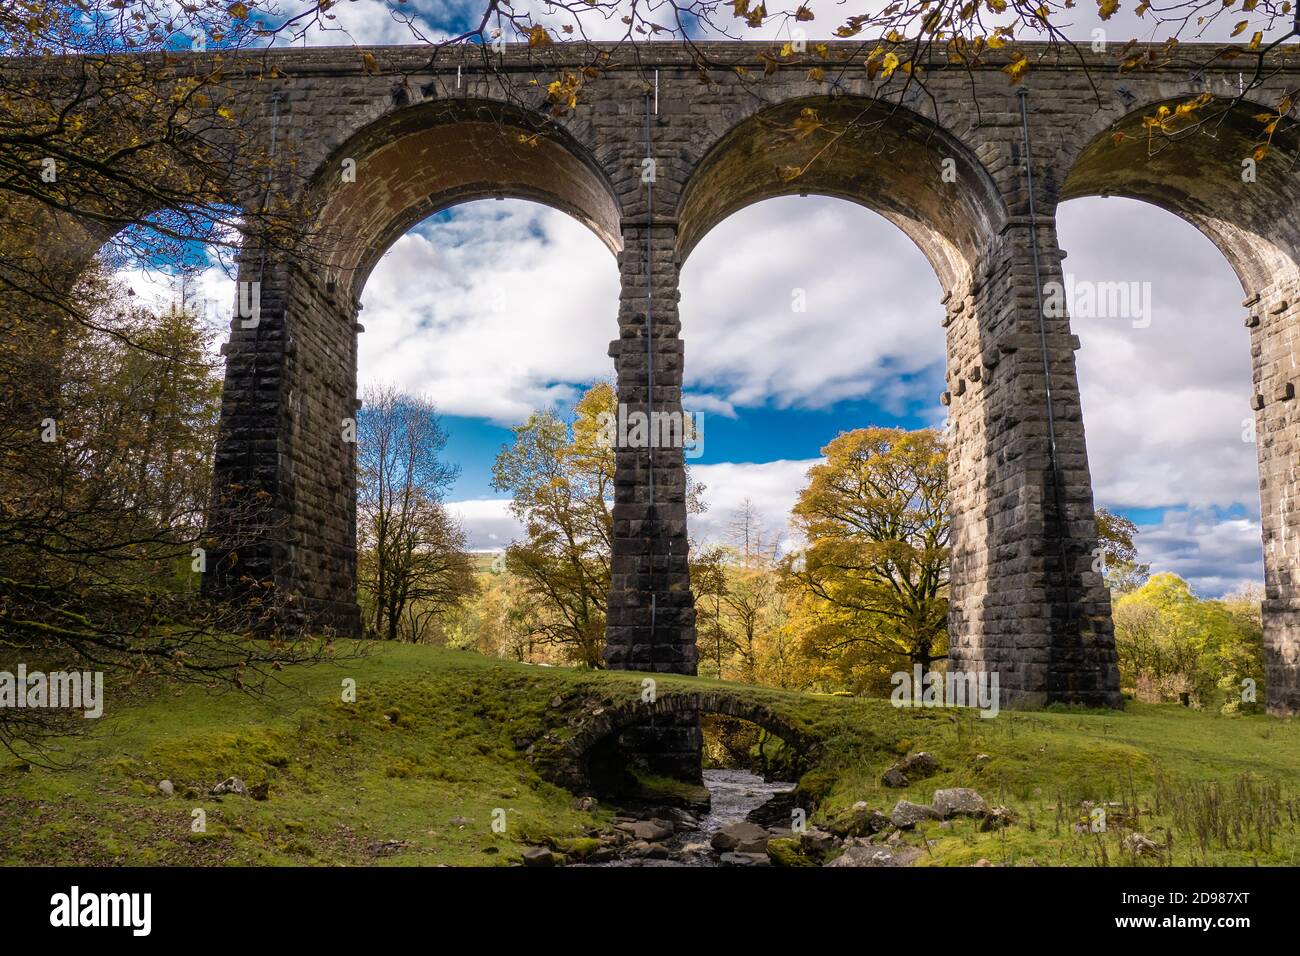 08.10.2020 Dent, Cumbria,  UK. Dent Head Viaduct is the next viaduct on the Settle-Carlisle Railway after Ribblehead Viaduct, going towards Carlisle. Stock Photo